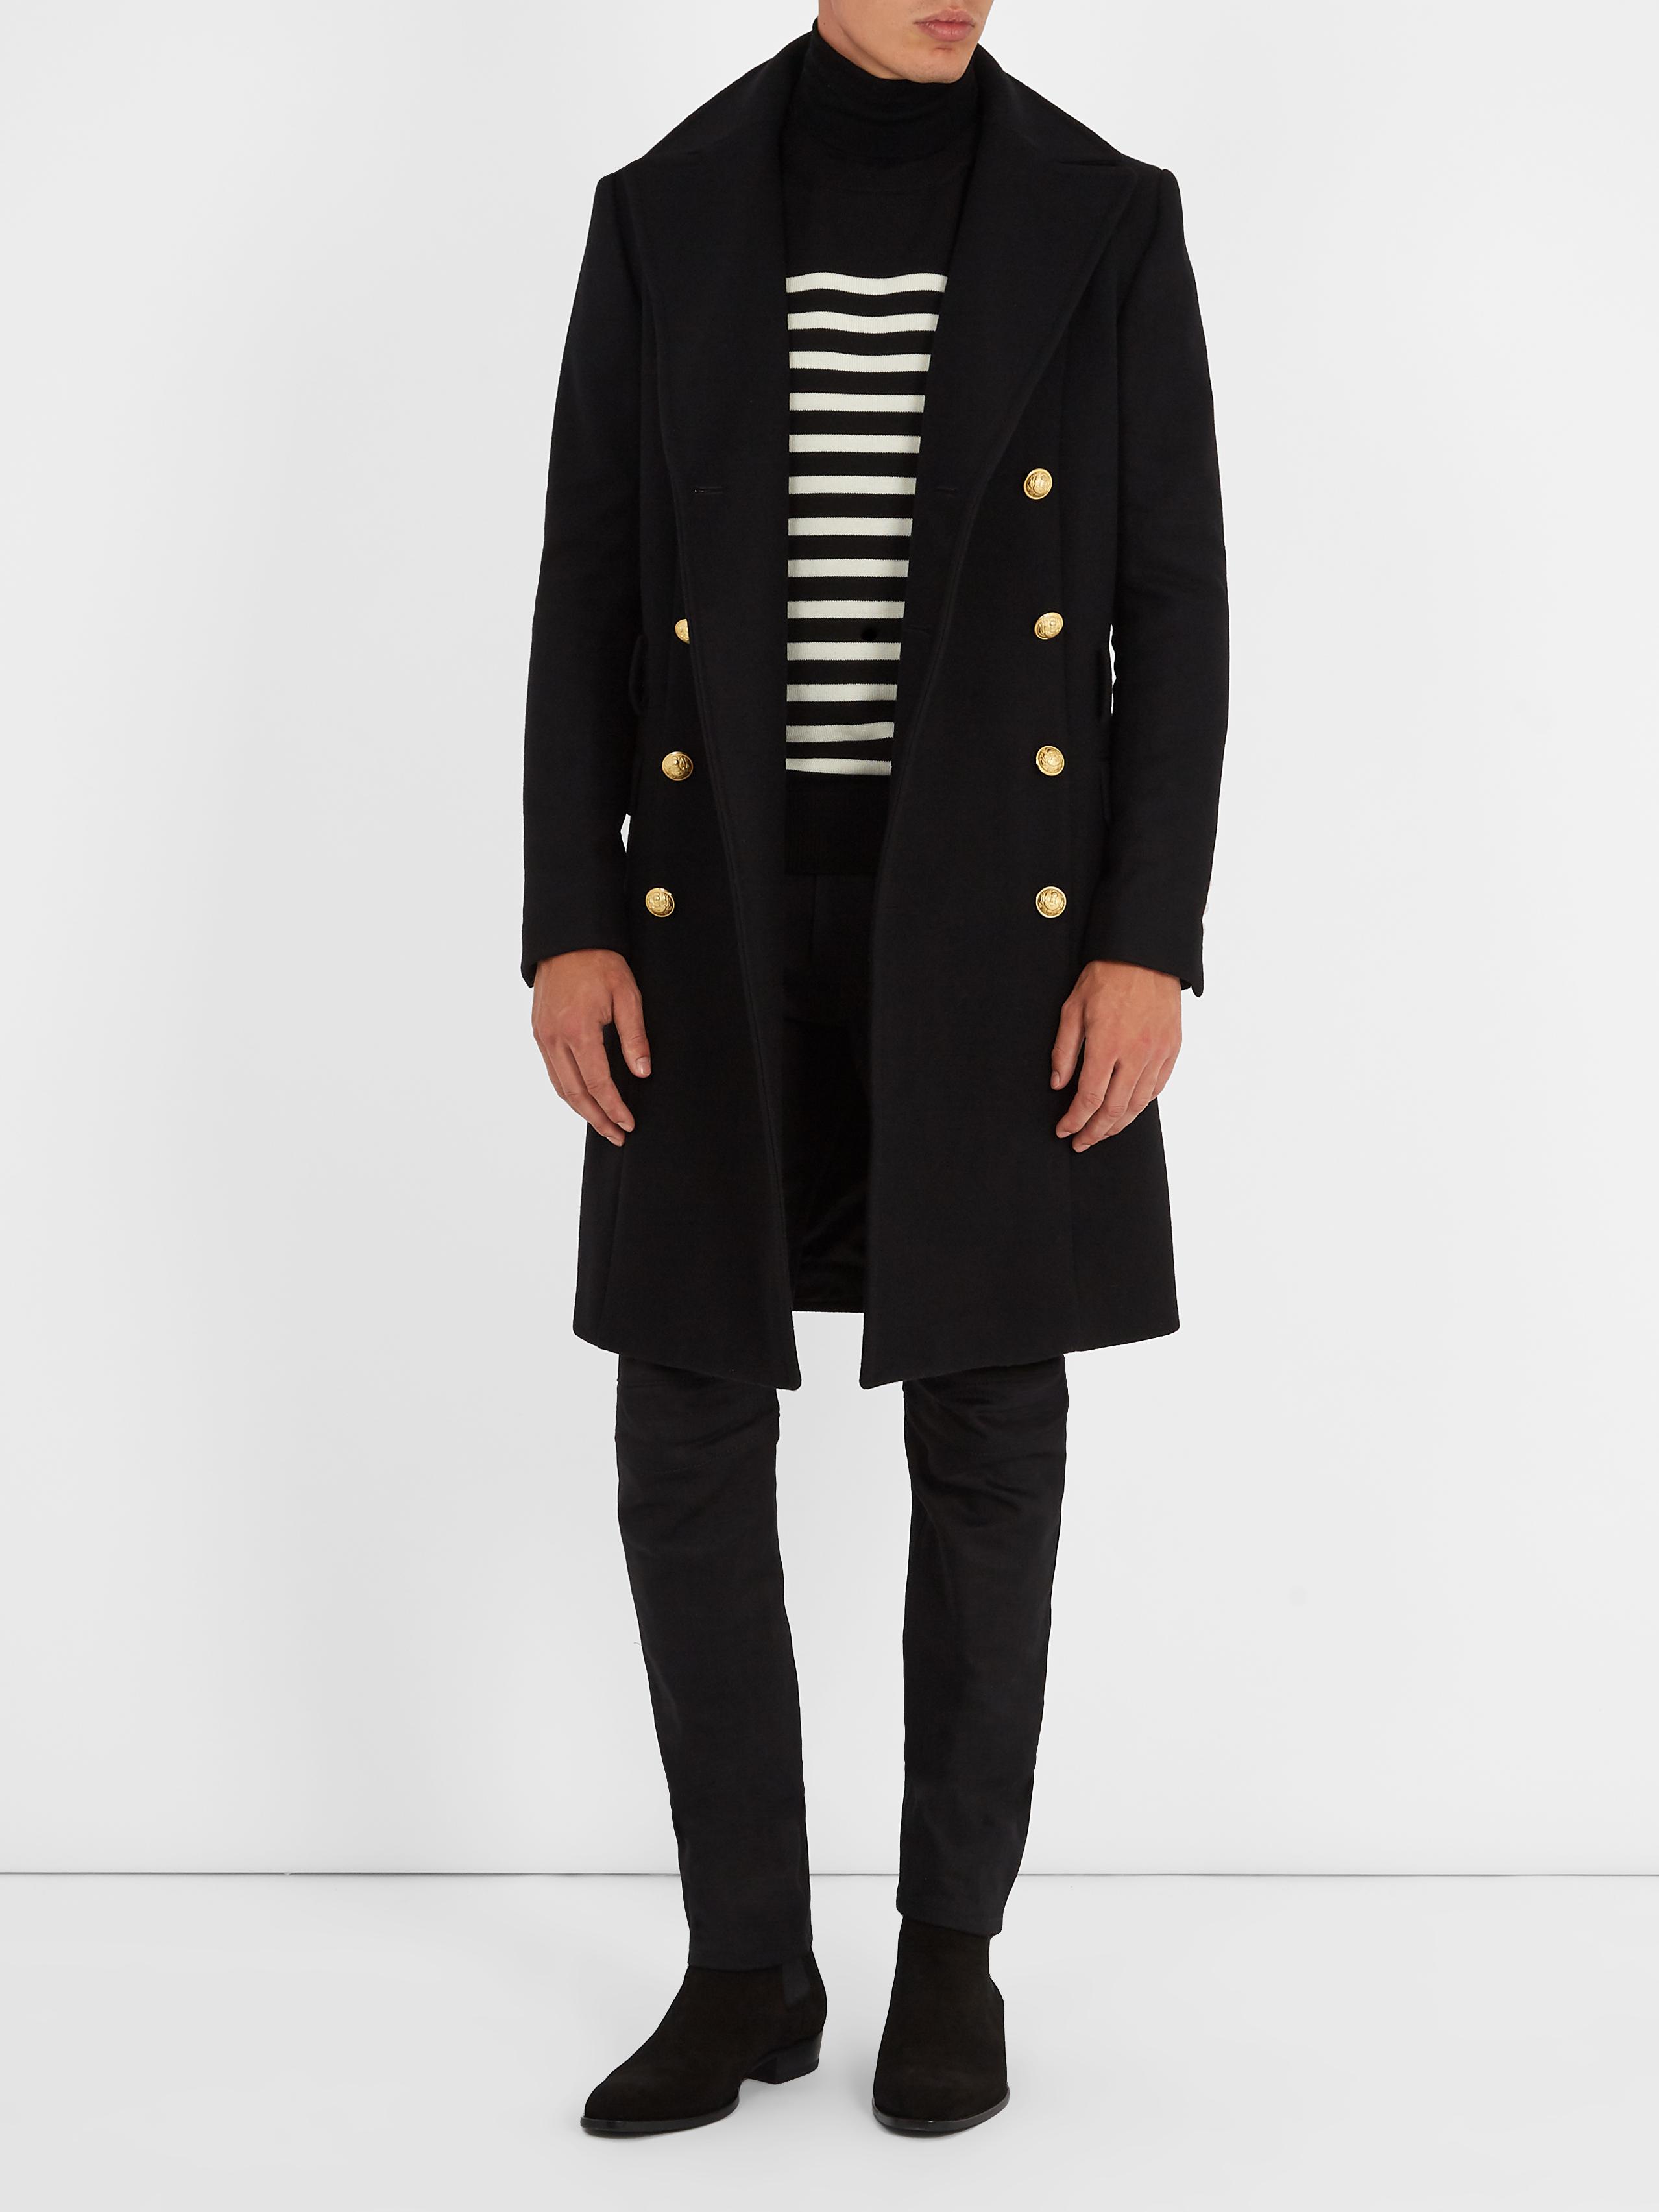 Balmain Double-breasted Wool-blend Military Coat in Black for Men | Lyst